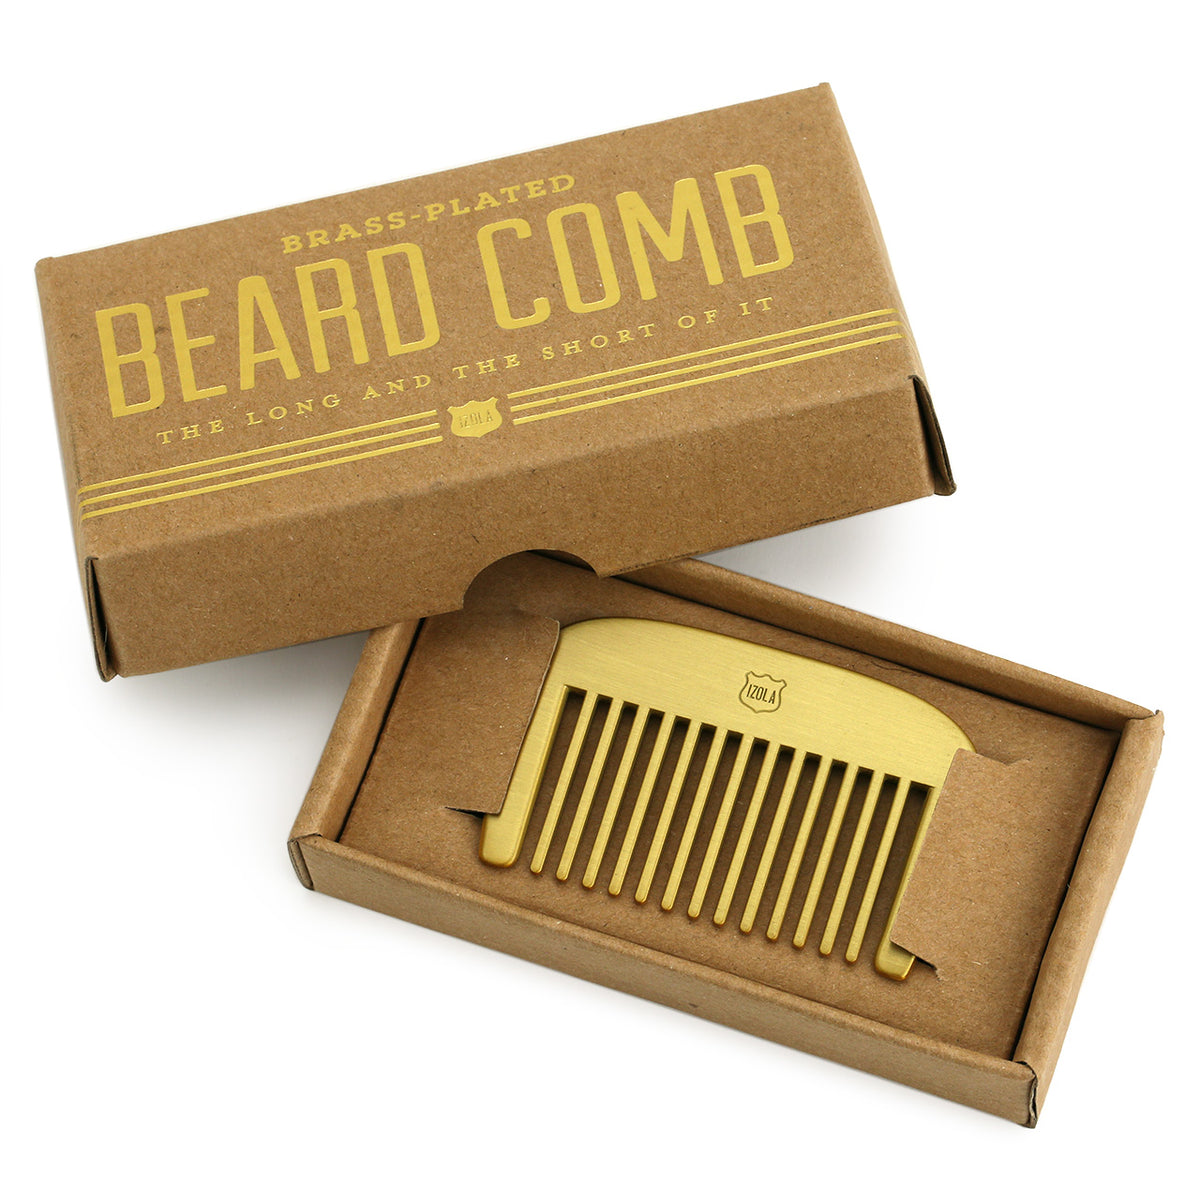 Short brass beard comb showing the Izola logo on one side, in its rustic kraft box with lid